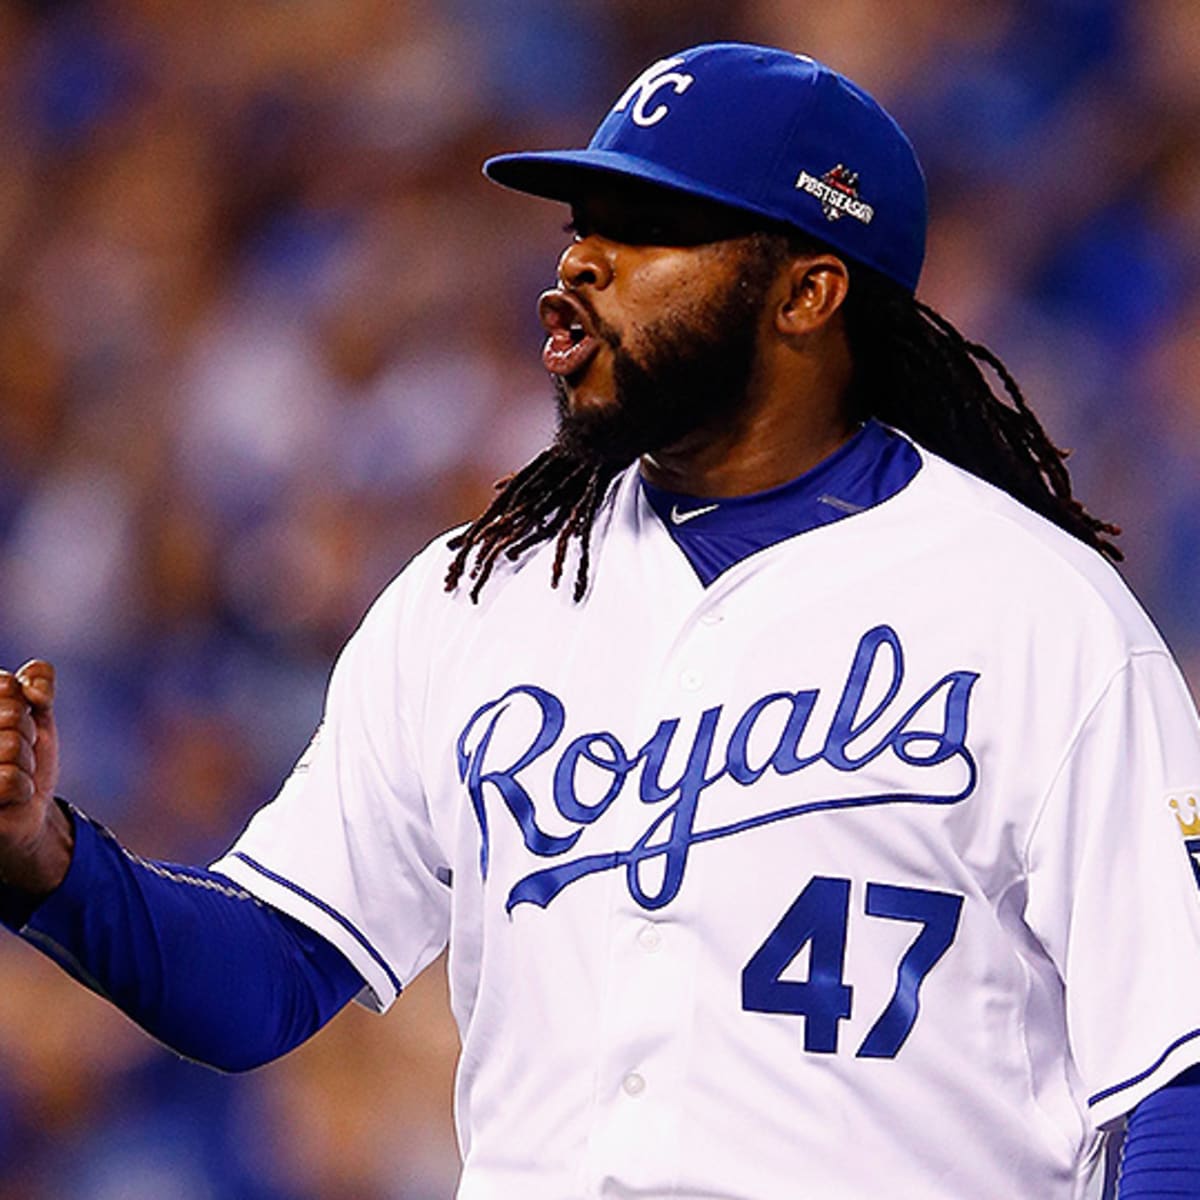 Kansas City Royals fans hold up pictures of starting pitcher Johnny Cueto  and catcher Salvador Perez as he Royals face the New York Mets in game 2 of  the World Series at